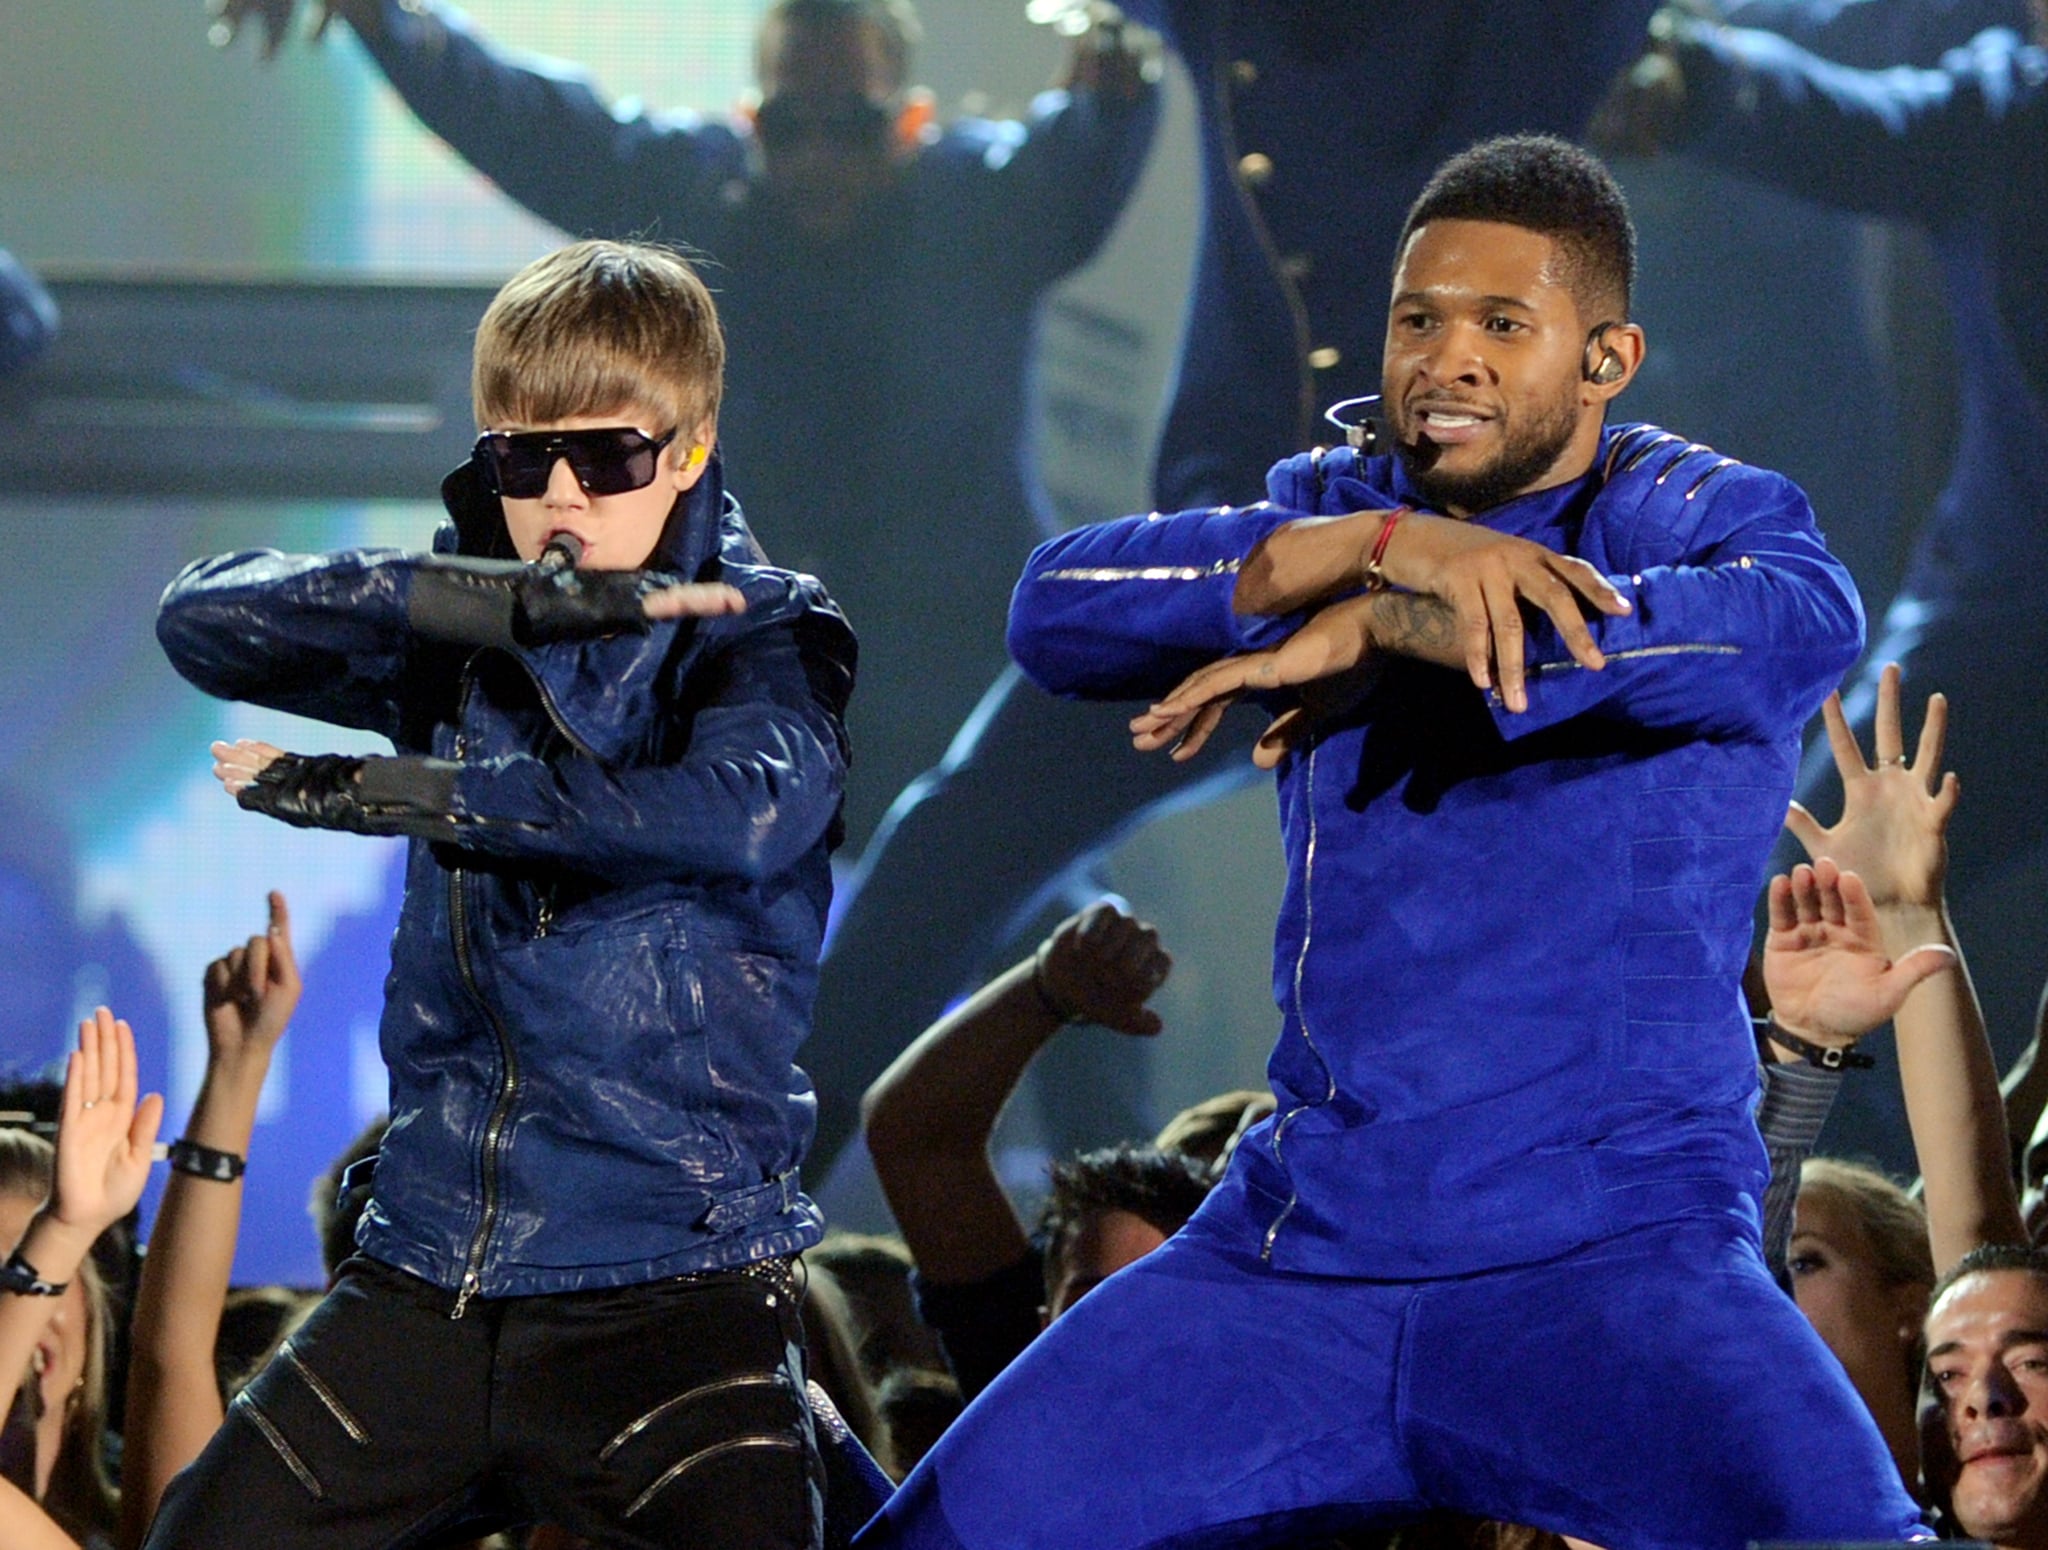 Justin Bieber and Usher were in sync on stage in 2011.